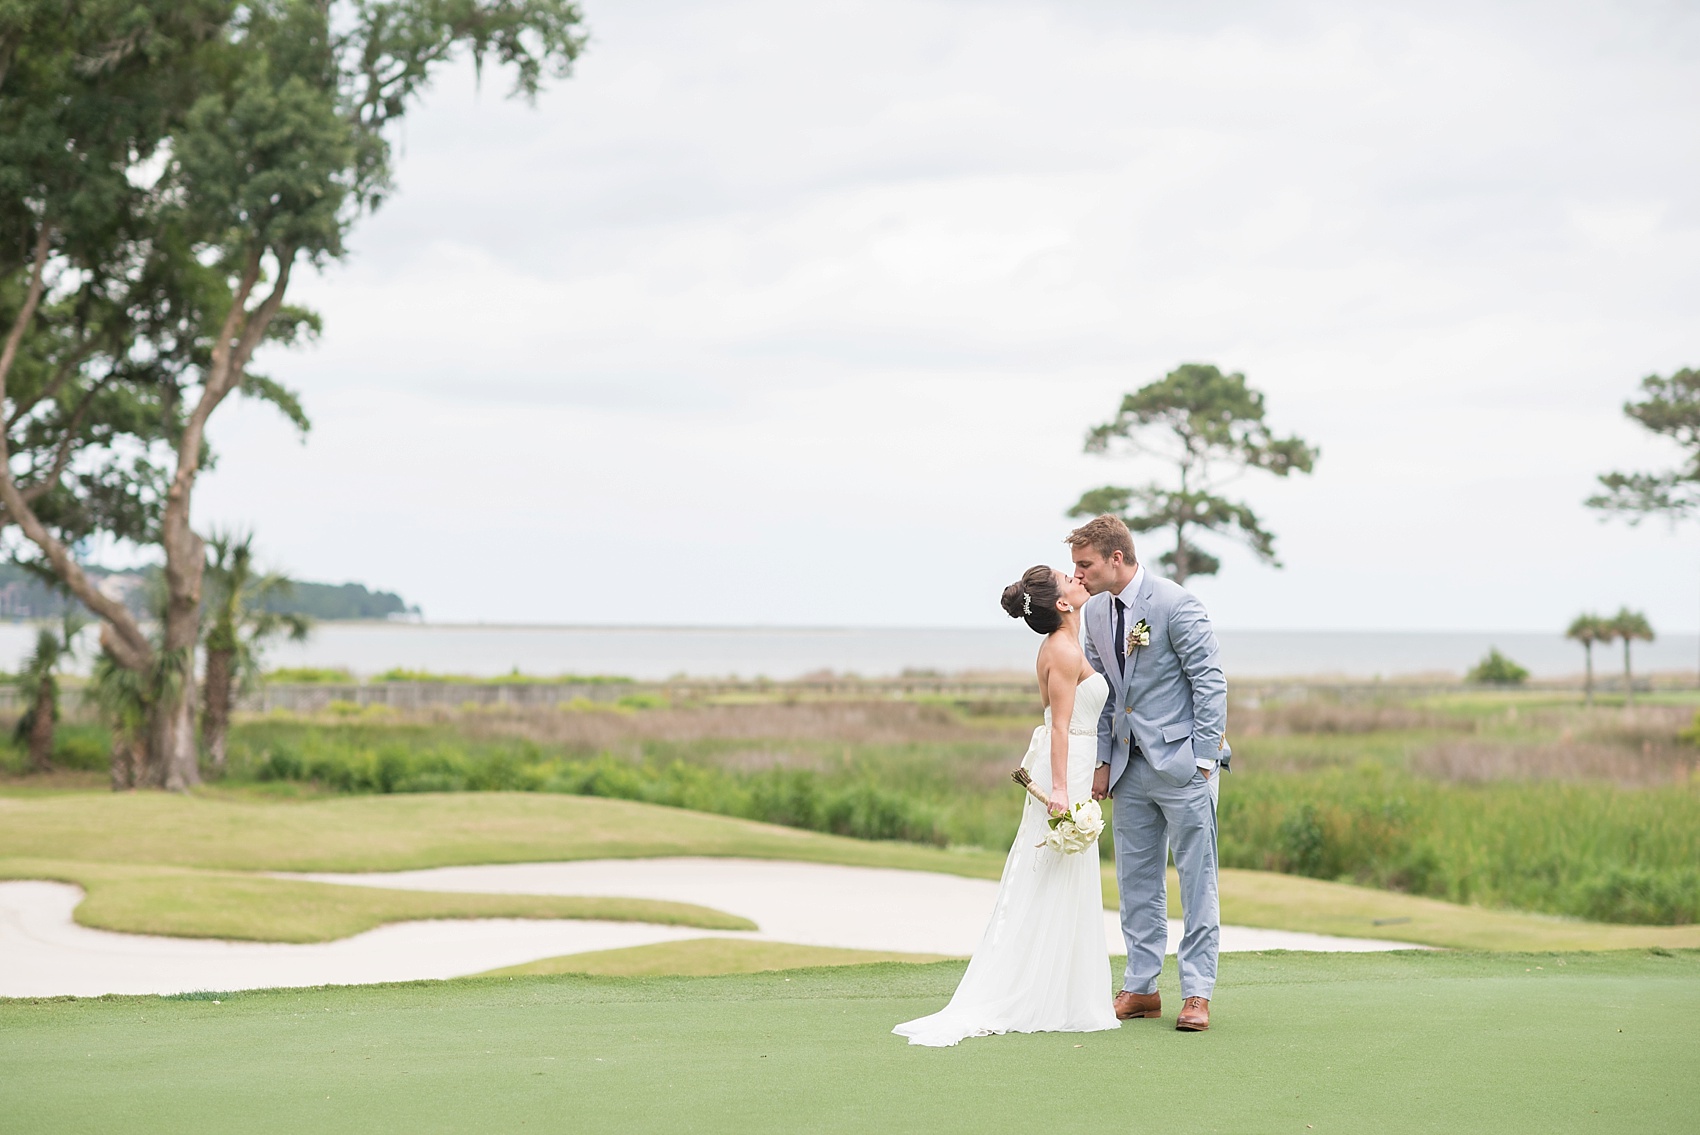 First look for the bride and groom on a golf course in Haig Point, South Carolina, off the coast of Hilton Head. Photos by Mikkel Paige Photography.